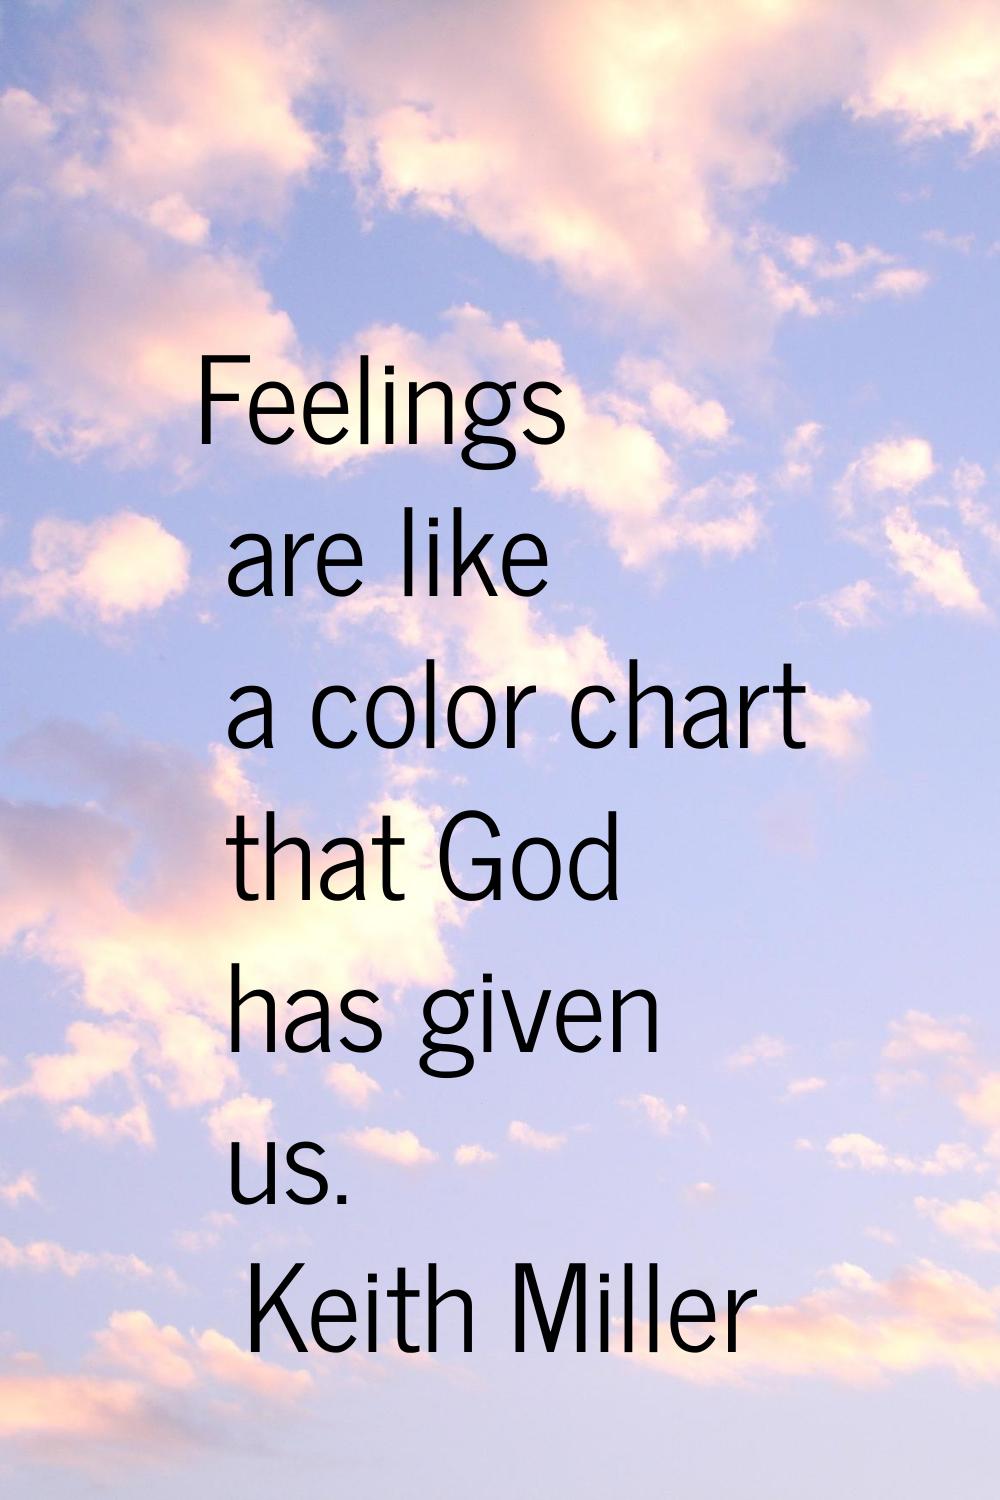 Feelings are like a color chart that God has given us.